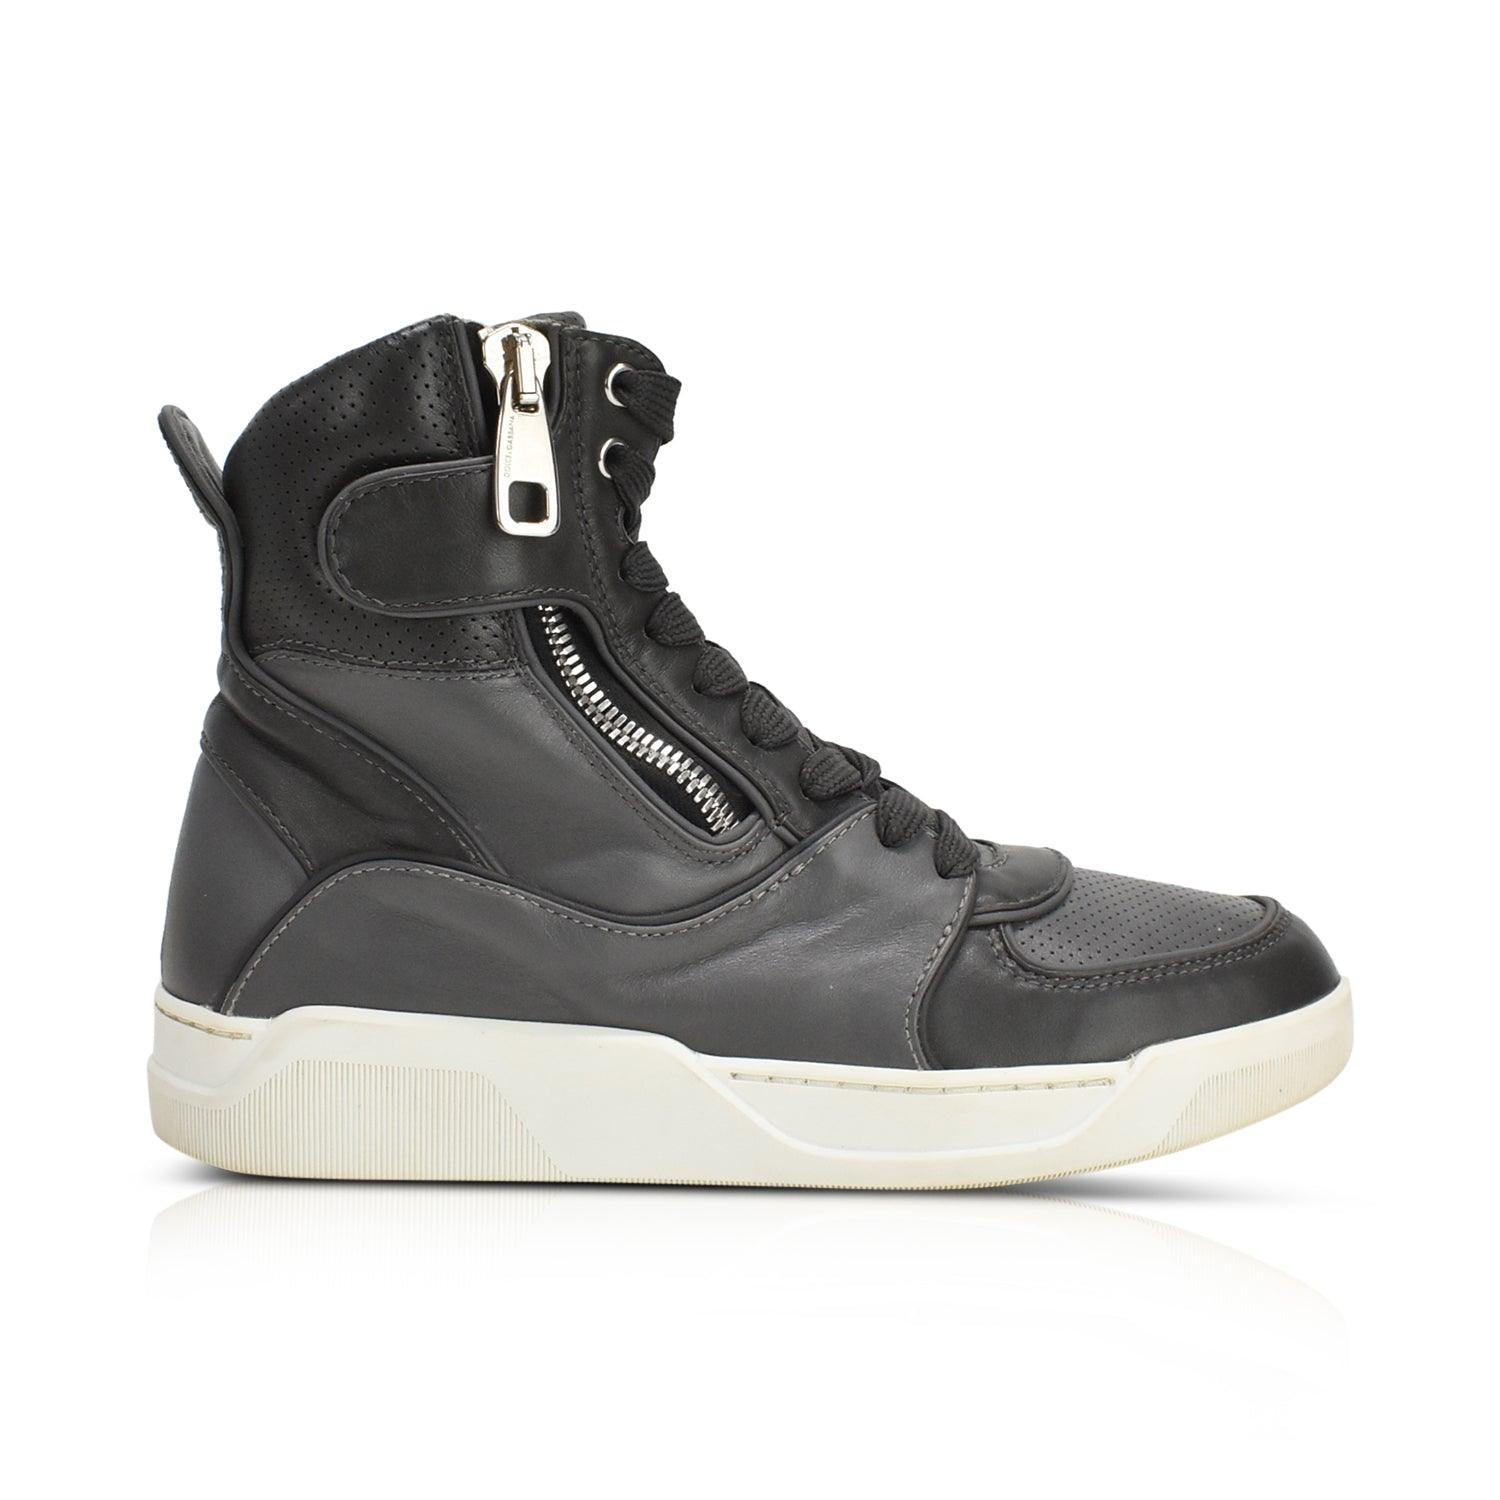 Dolce & Gabbana Sneakers - Men's 7.5 - Fashionably Yours